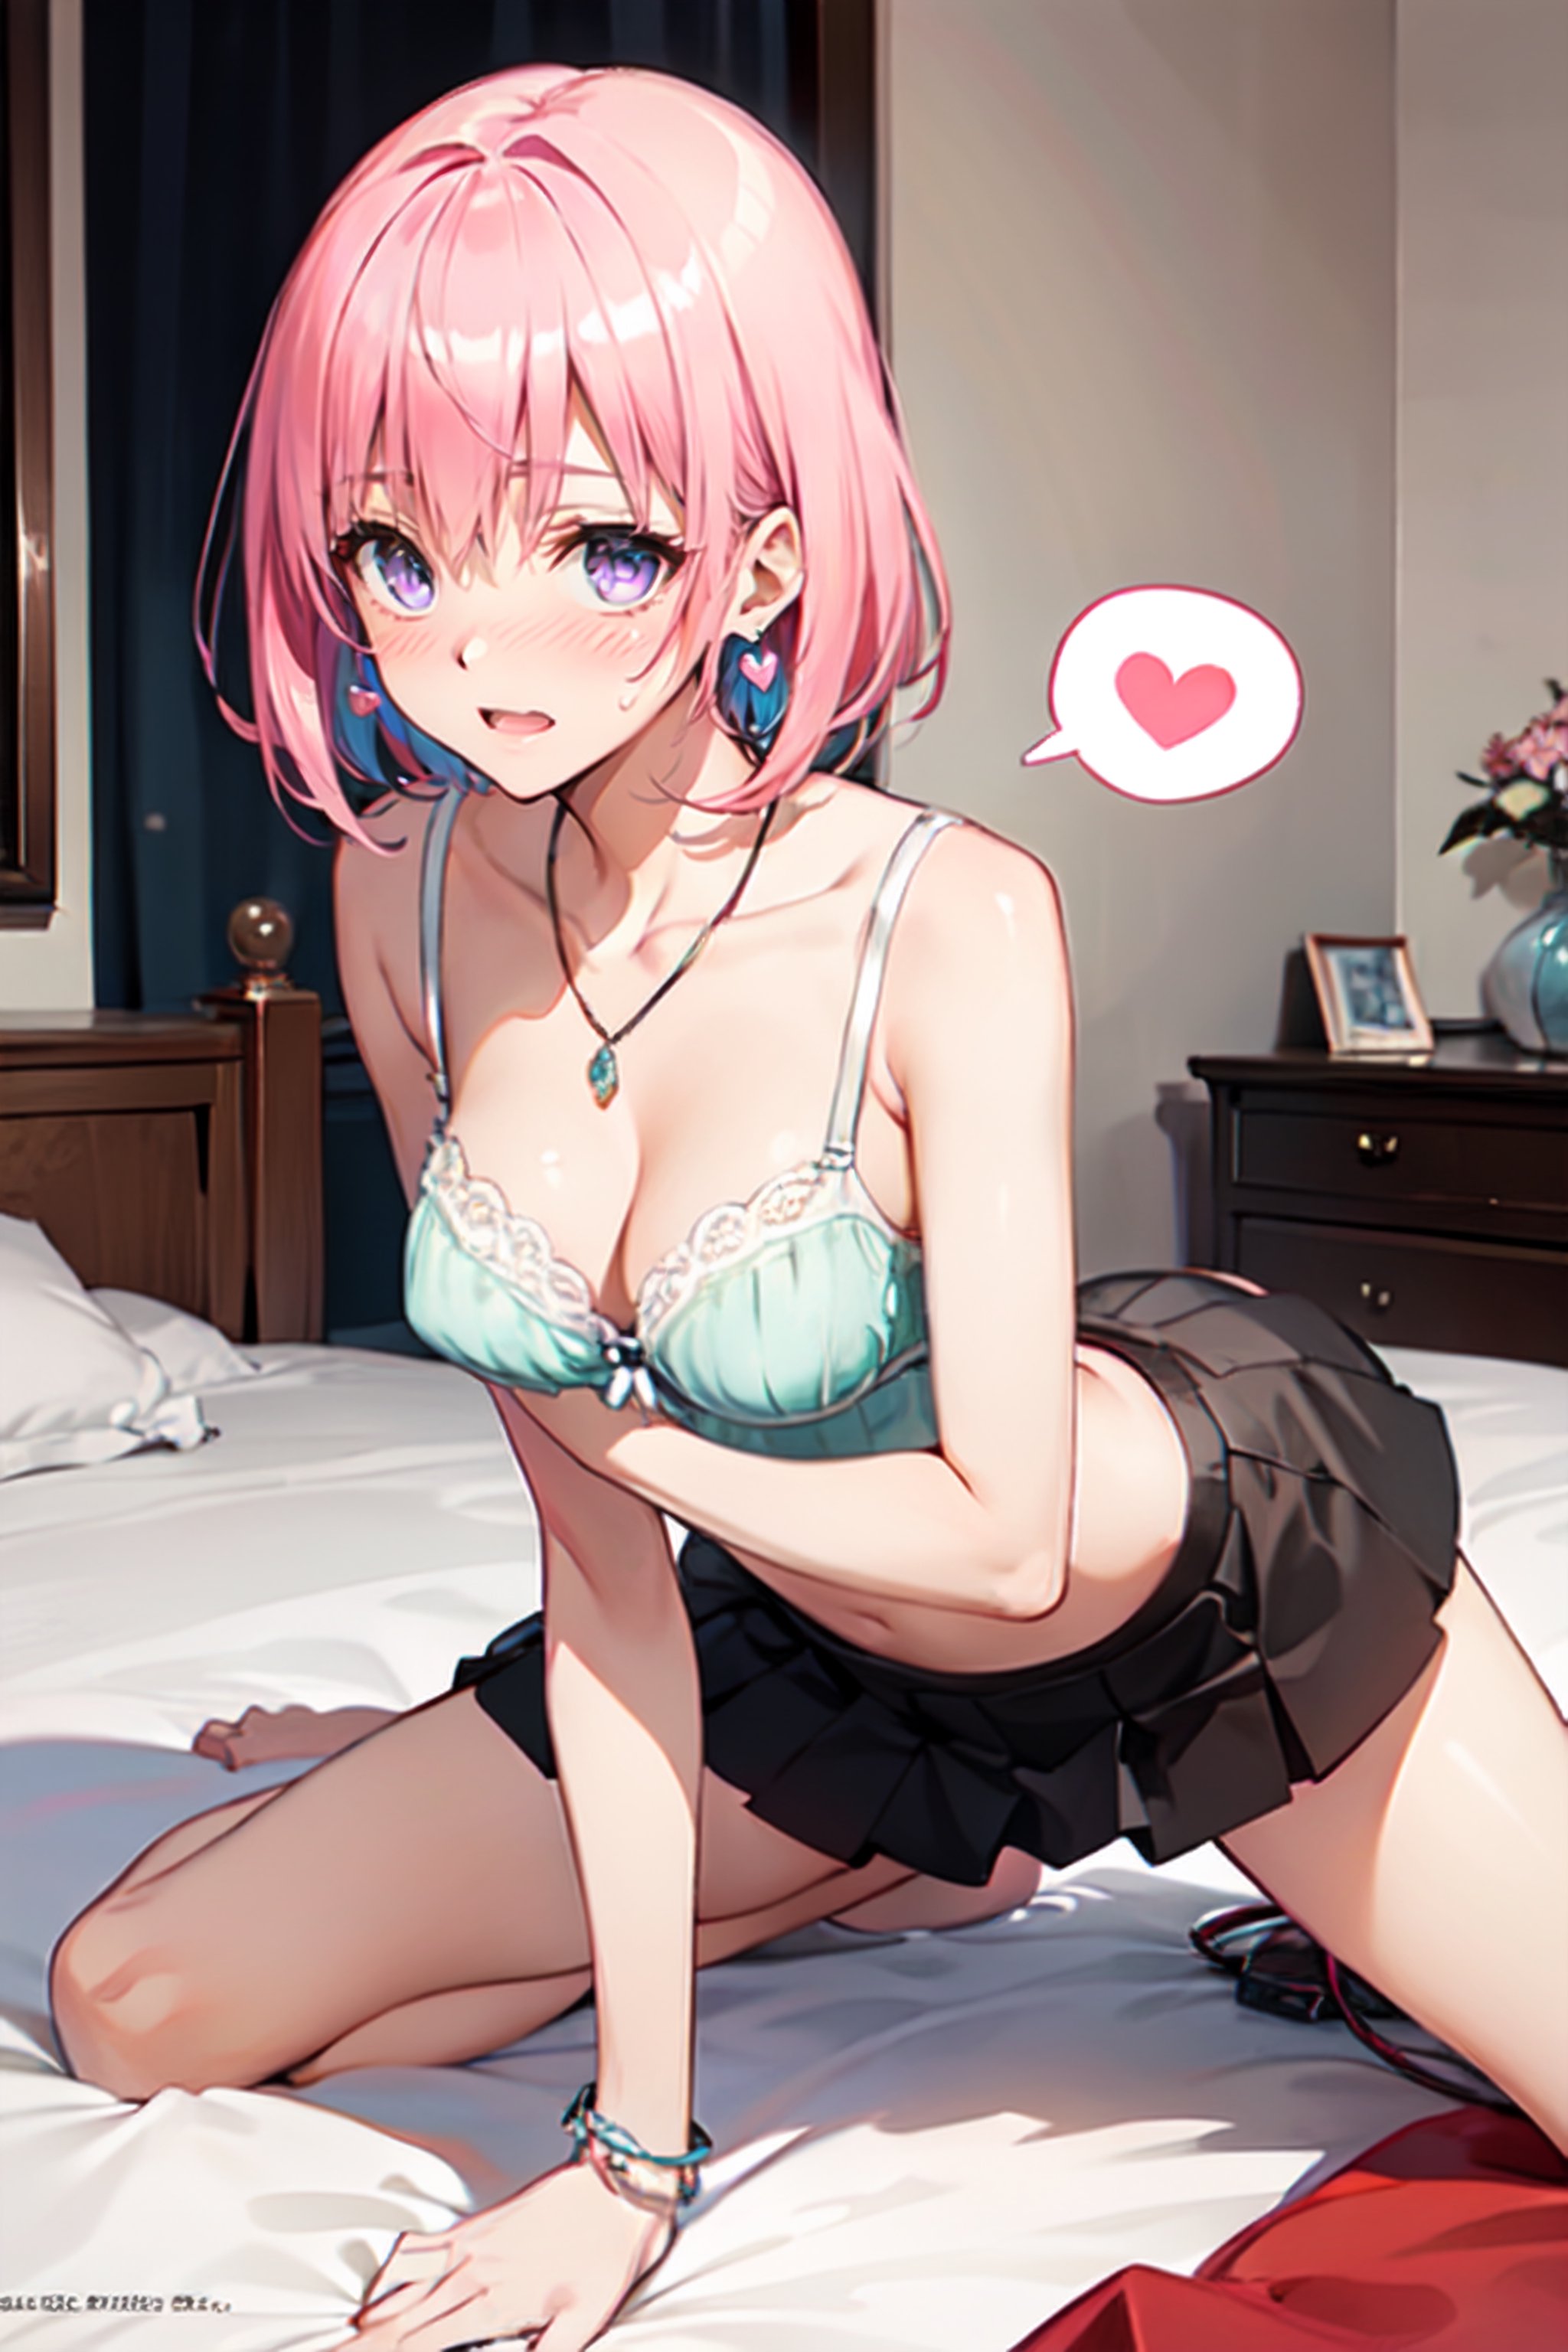 best quality, masterpiece, (realistic:1.2), 1 girl, detailed face, beautiful eyes,  having fun on the bed). She looks very happy playing on the bed. She accessorized with a medium, silver bracelet on her wrist. While playing, the girl was drawn in by the colorful and glittering scenery of the hotel. She is wearing cute heart-shaped earrings and a matching necklace and smiling in the bright sun, (extremely detailed nipple), (spoken heart), (upturned eyes),((pov)),(embarrassed:1.2),(camisole,mini skirt, bra, panty), {{{{8k wallpaper}}}},
{{{{extremely detailed eyes}}}},
{{{{extremely detailed body}}}},
{{{{extremely detailed finger}}}},(((best quality))), ((official art:1.2)), (best anatomy), solo, 1girl, (kawaii), (five digits), (speculum), (4k), (high resolution), ((thin waist)),(nabel),(Beautiful breasts),(beautiful leg:1.3),(skinny leg),(beautiful hands:1.2),(teats),(very slim),(slender:1.3),(ribbed),(skinny limbs),(beautiful vagina:1.3),(beautidful eyes:1.1), (((Beautiful face:1.3))),(best quality:1.1), (masterpiece:1.4), (absurdres:1.0), portrait, close up,1girl, bob cut, medium hair ,pink hair, bob cut,purple eyes, ((((big breasts)))), (blush:1.2), ((small hip)), medium hair, pink hair, disheveled hair,afterglow, (20 years old), be breathless,on bed,shamefaced, embarrassed, half-closed eye,self suck,deepthroat / cum / hands on another's head / pov hands / head grab,,penisface,penis_sheath,multiple penises,multiple boys,VACUUM FELLATIO,cameltoe,inniepussy1,spread\(vaginal\),pussy,SEX,spread pussy,doggystyle,TOP-DOWN BOTTOM-UP,sidedoggystyle